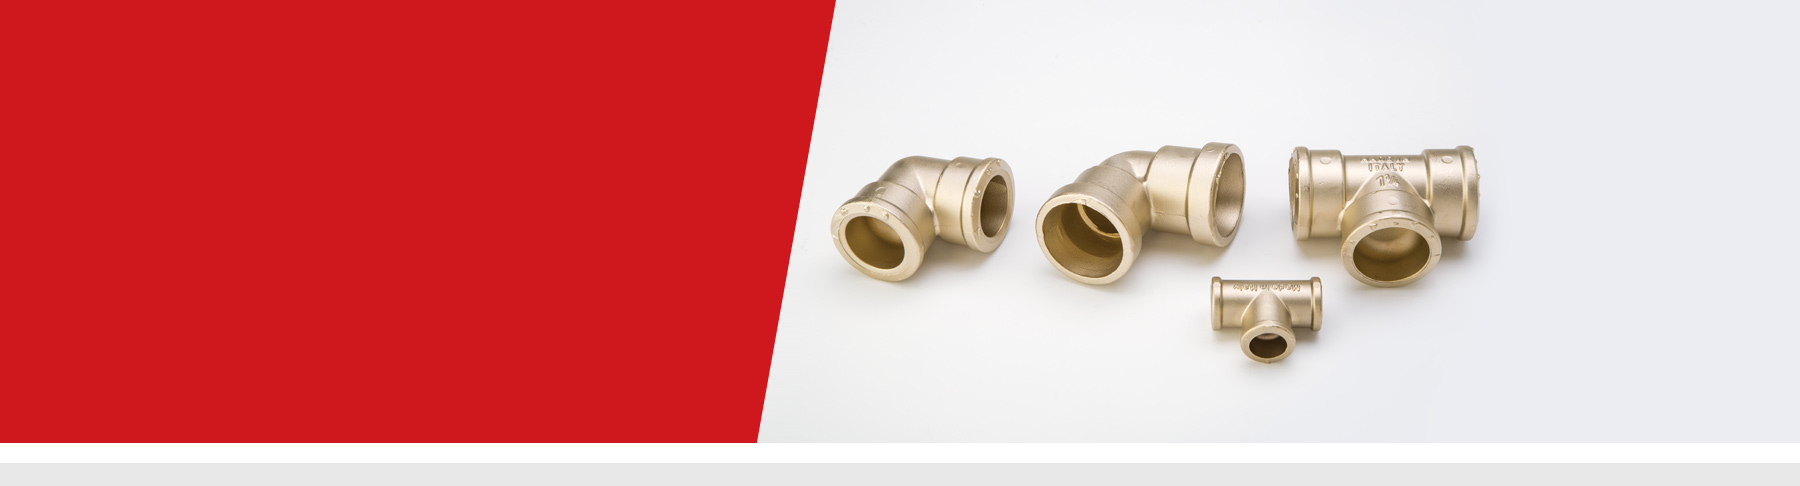 Brass fittings for water